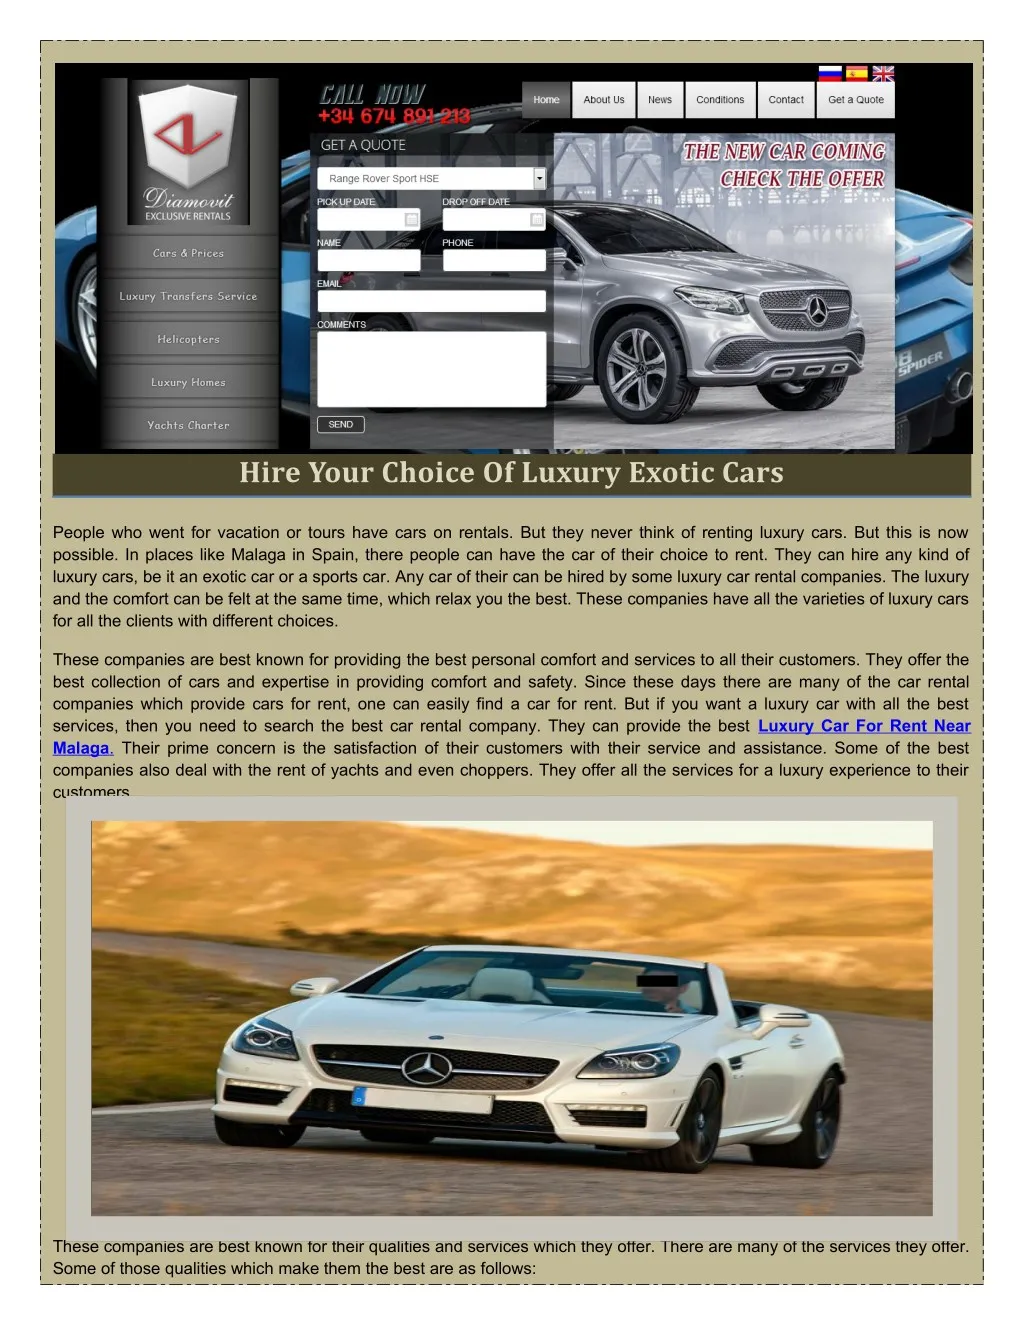 hire your choice of luxury exotic cars